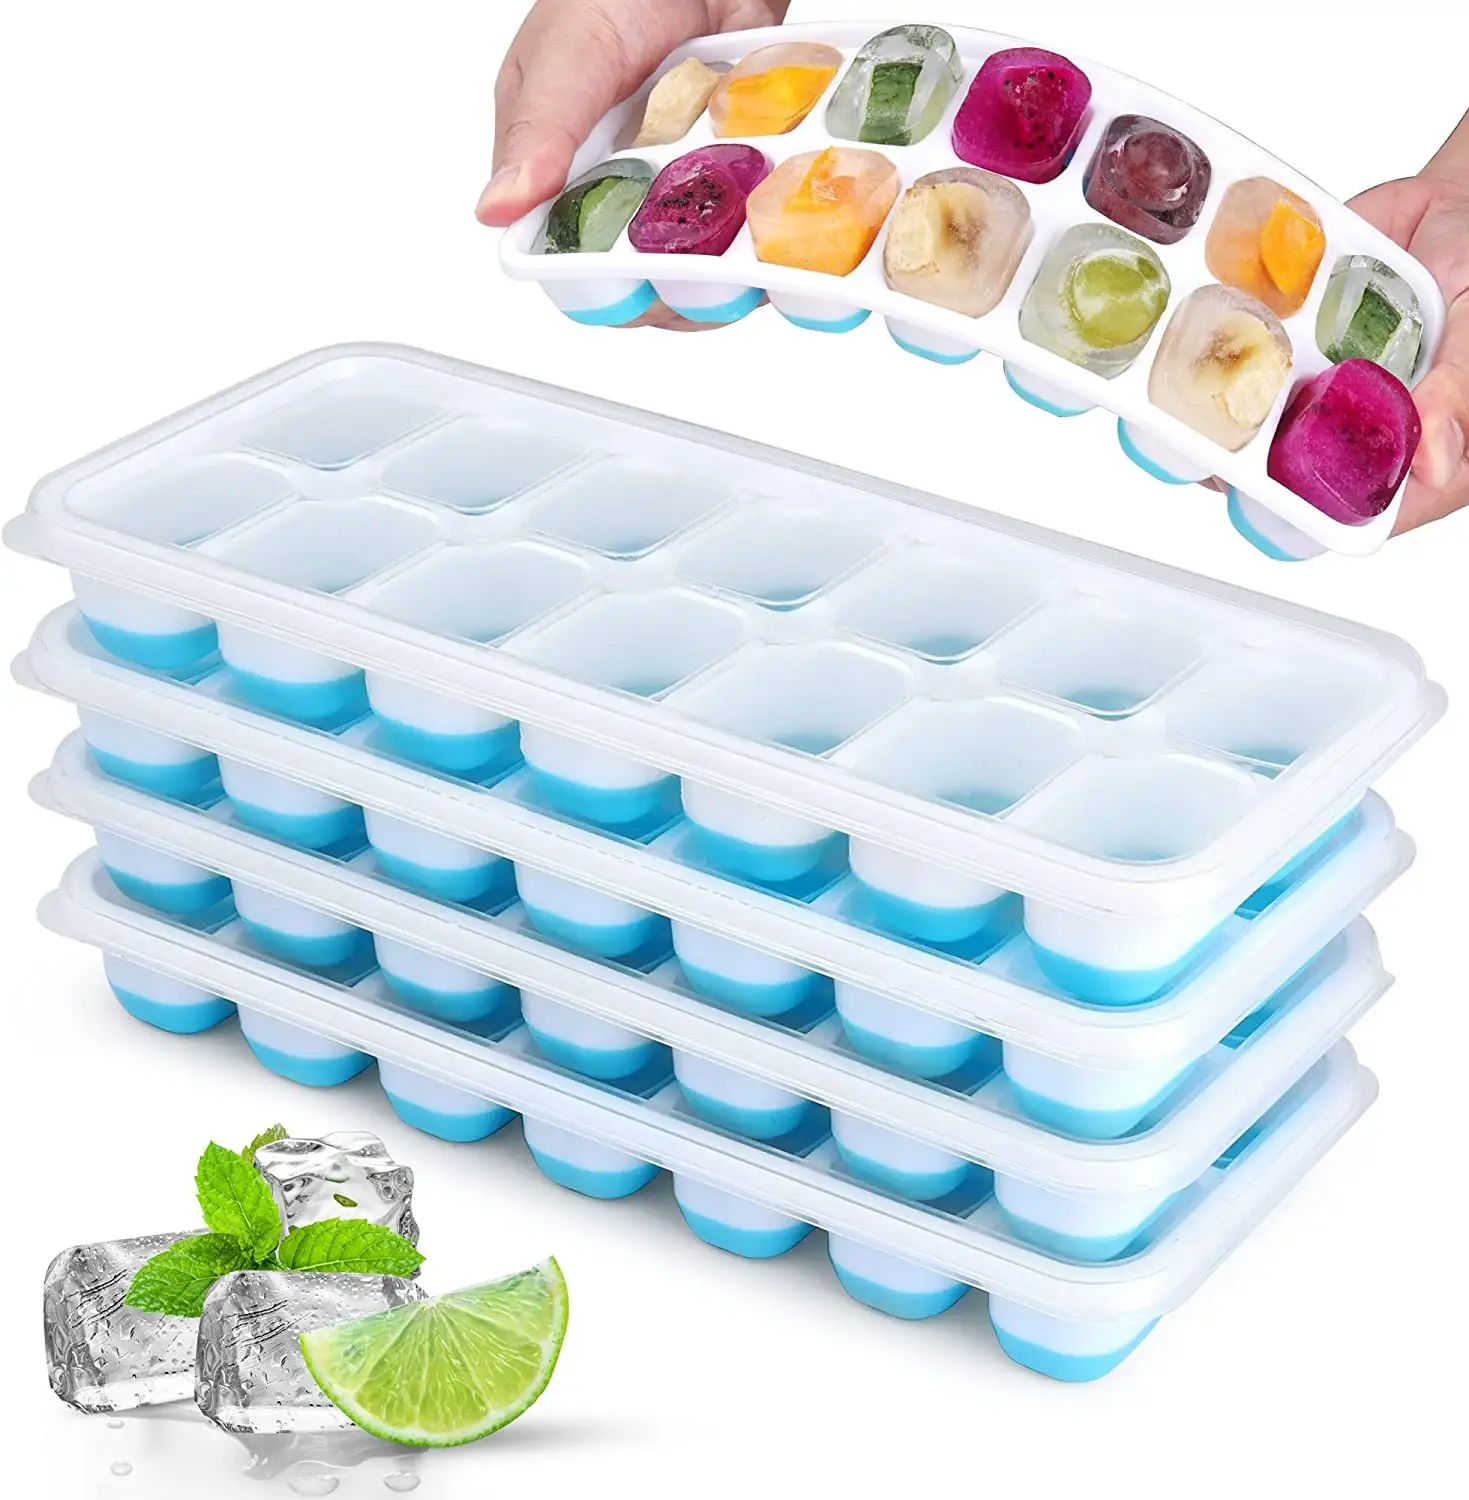 Silicone Ice Cube Trays 14 Grids Silicone Ice Cube Molds with Spill-Resistant Removable Lid